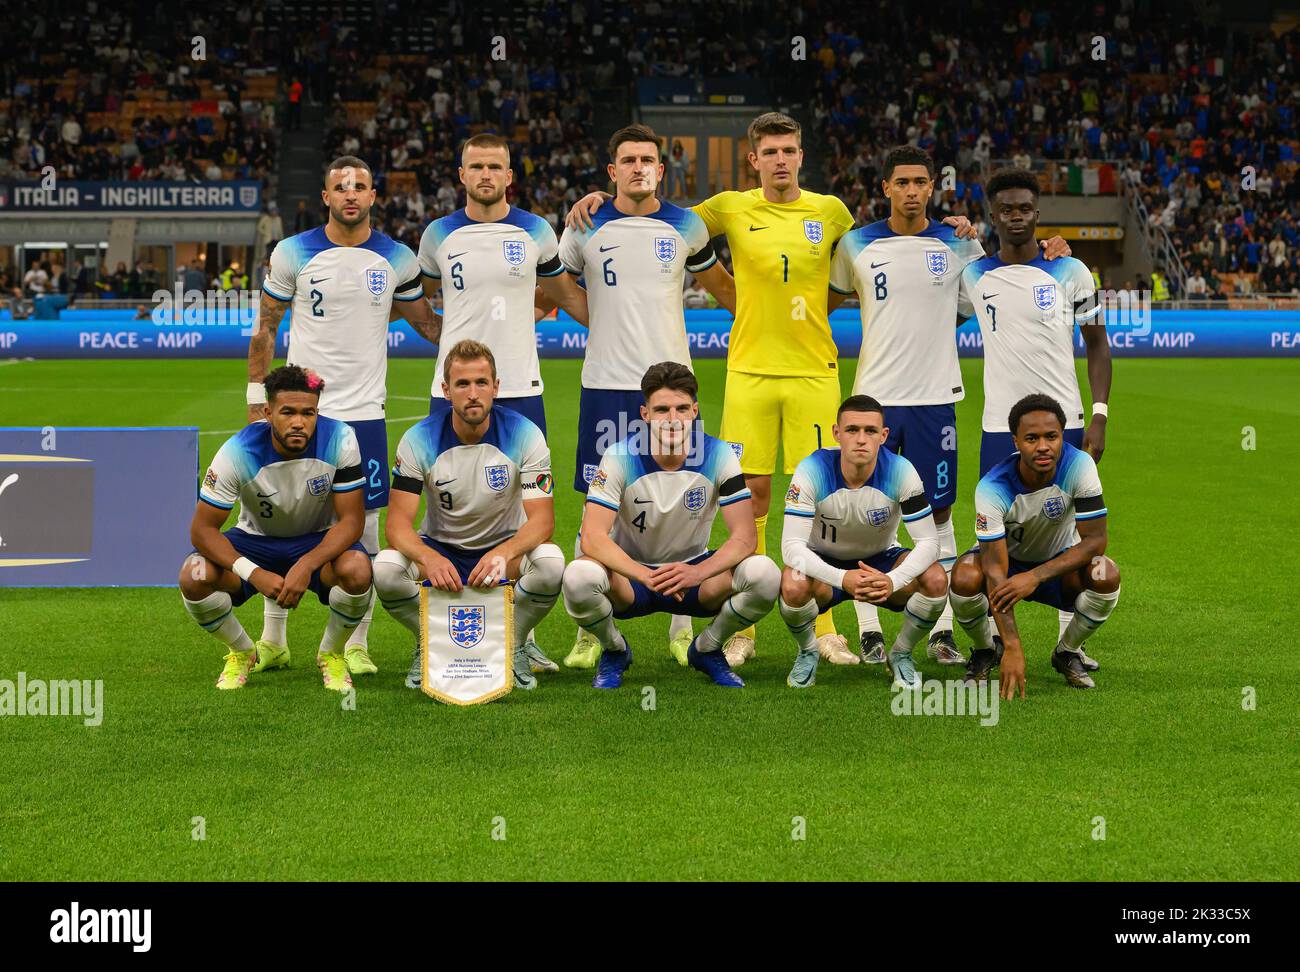 23 Sep 2022 - Italy v England - UEFA Nations League - Group 3 - San Siro  The England Team Group.  Nick Pope, Kyle Walker, Reece James, Declan Race, Eric Dier, Harry Maguire, Bukayo Saka, Jude Bellingham, Harry Kane, Raheem Sterling, Phil Foden. Picture : Mark Pain / Alamy Live News Stock Photo